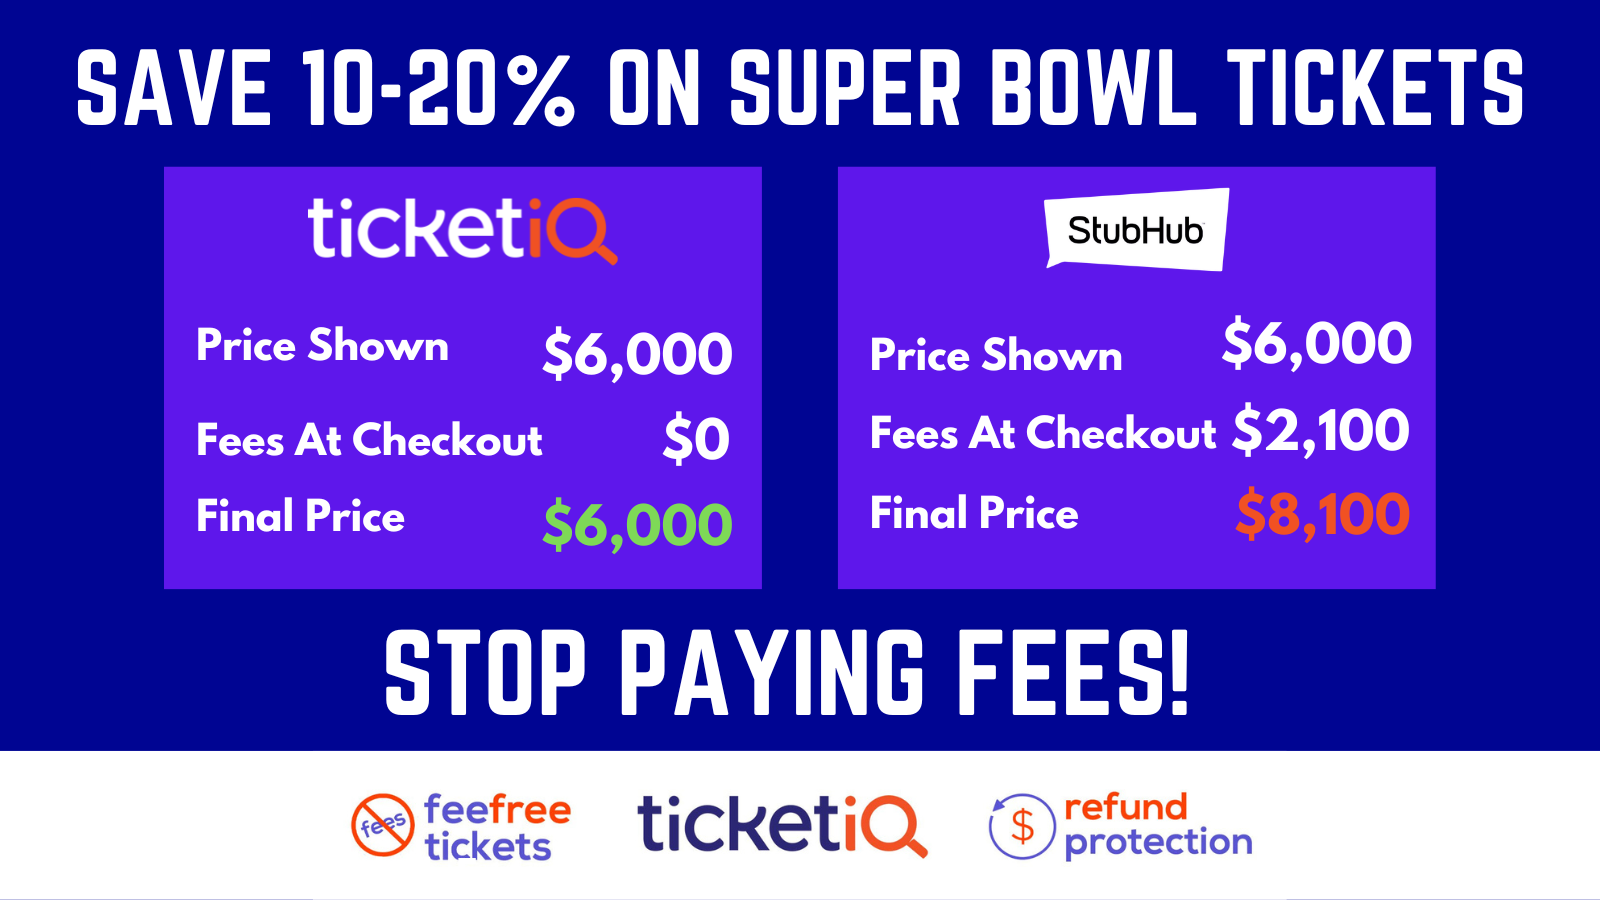 super bowl ticket purchase